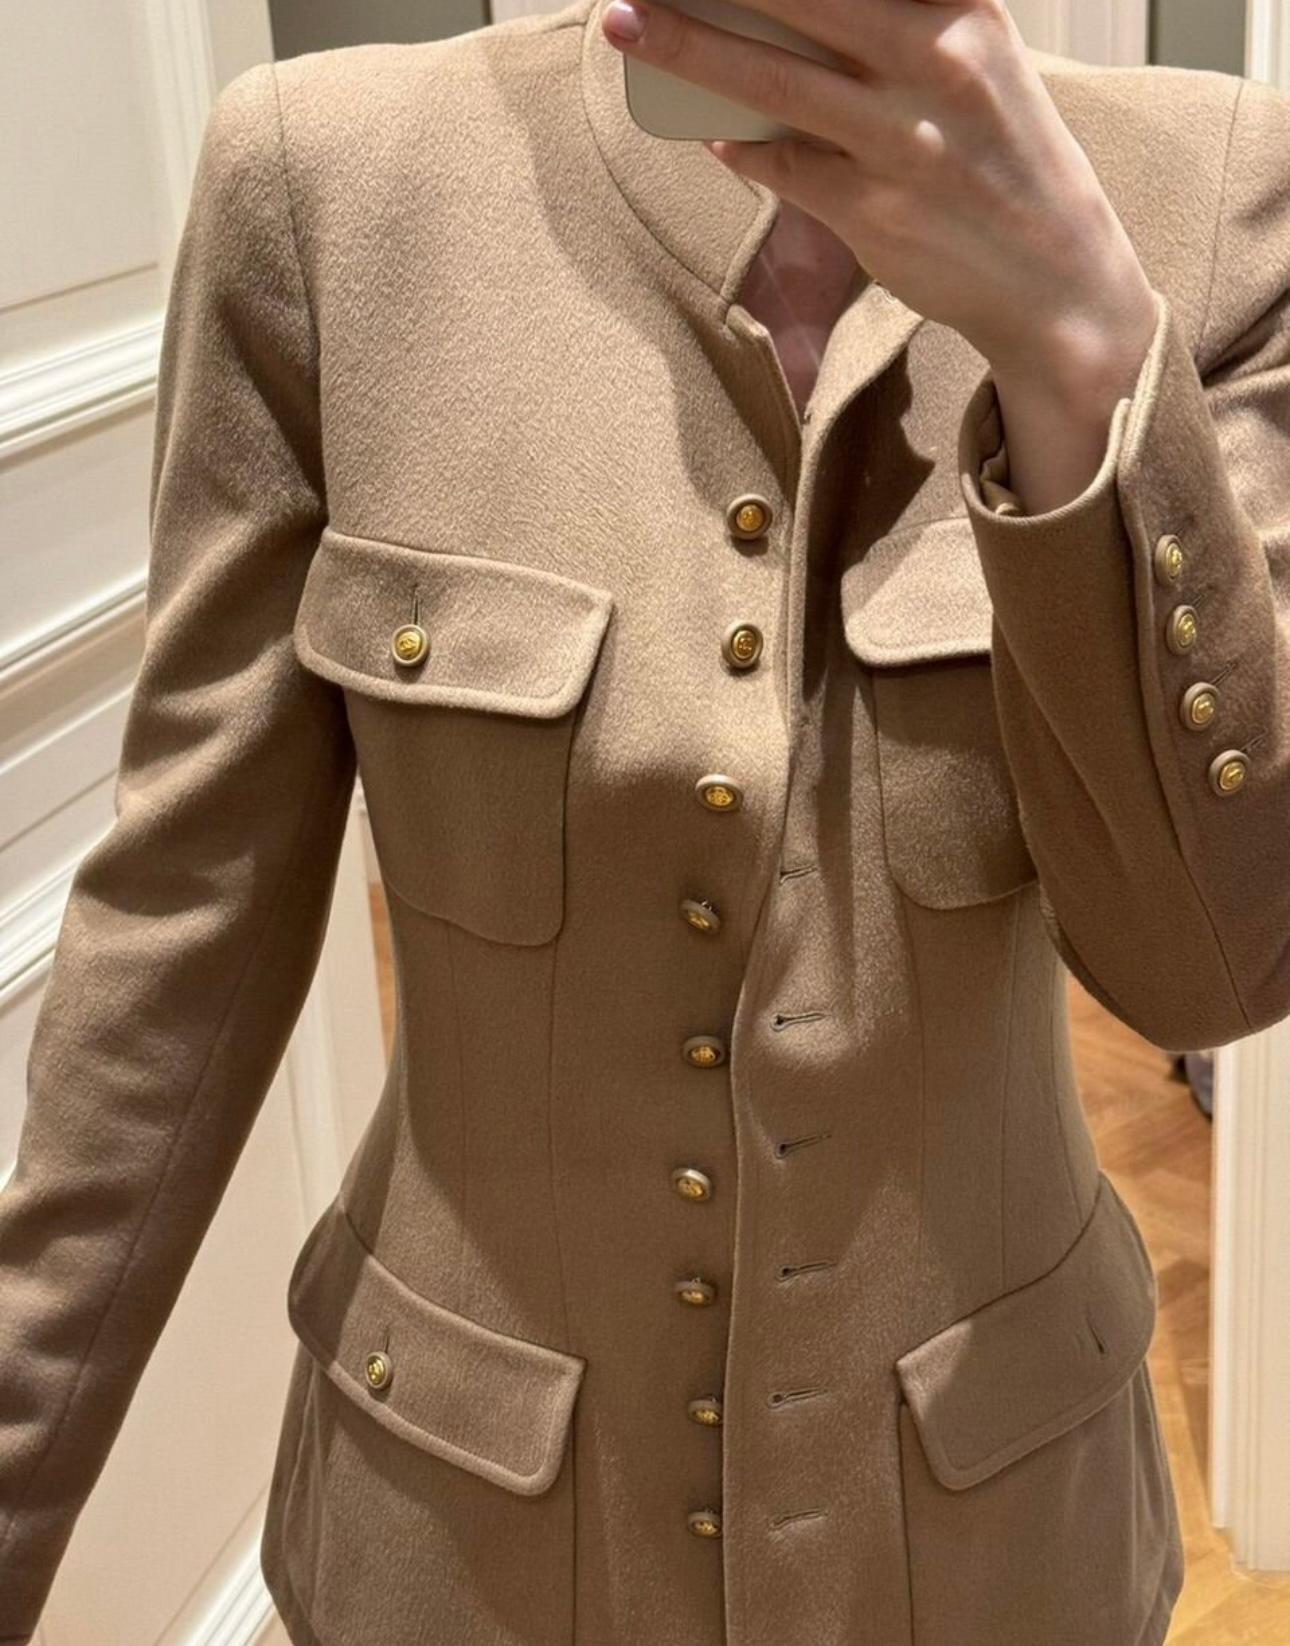 Stunning nude beige cashmere jacket from Karl Lagerfeld Fall collection of 1990s.
- CC logo buttons with 24-karat gold coating
- CC logo silk lining
Size mark was 36 FR, size label detached. Condition os pristine.